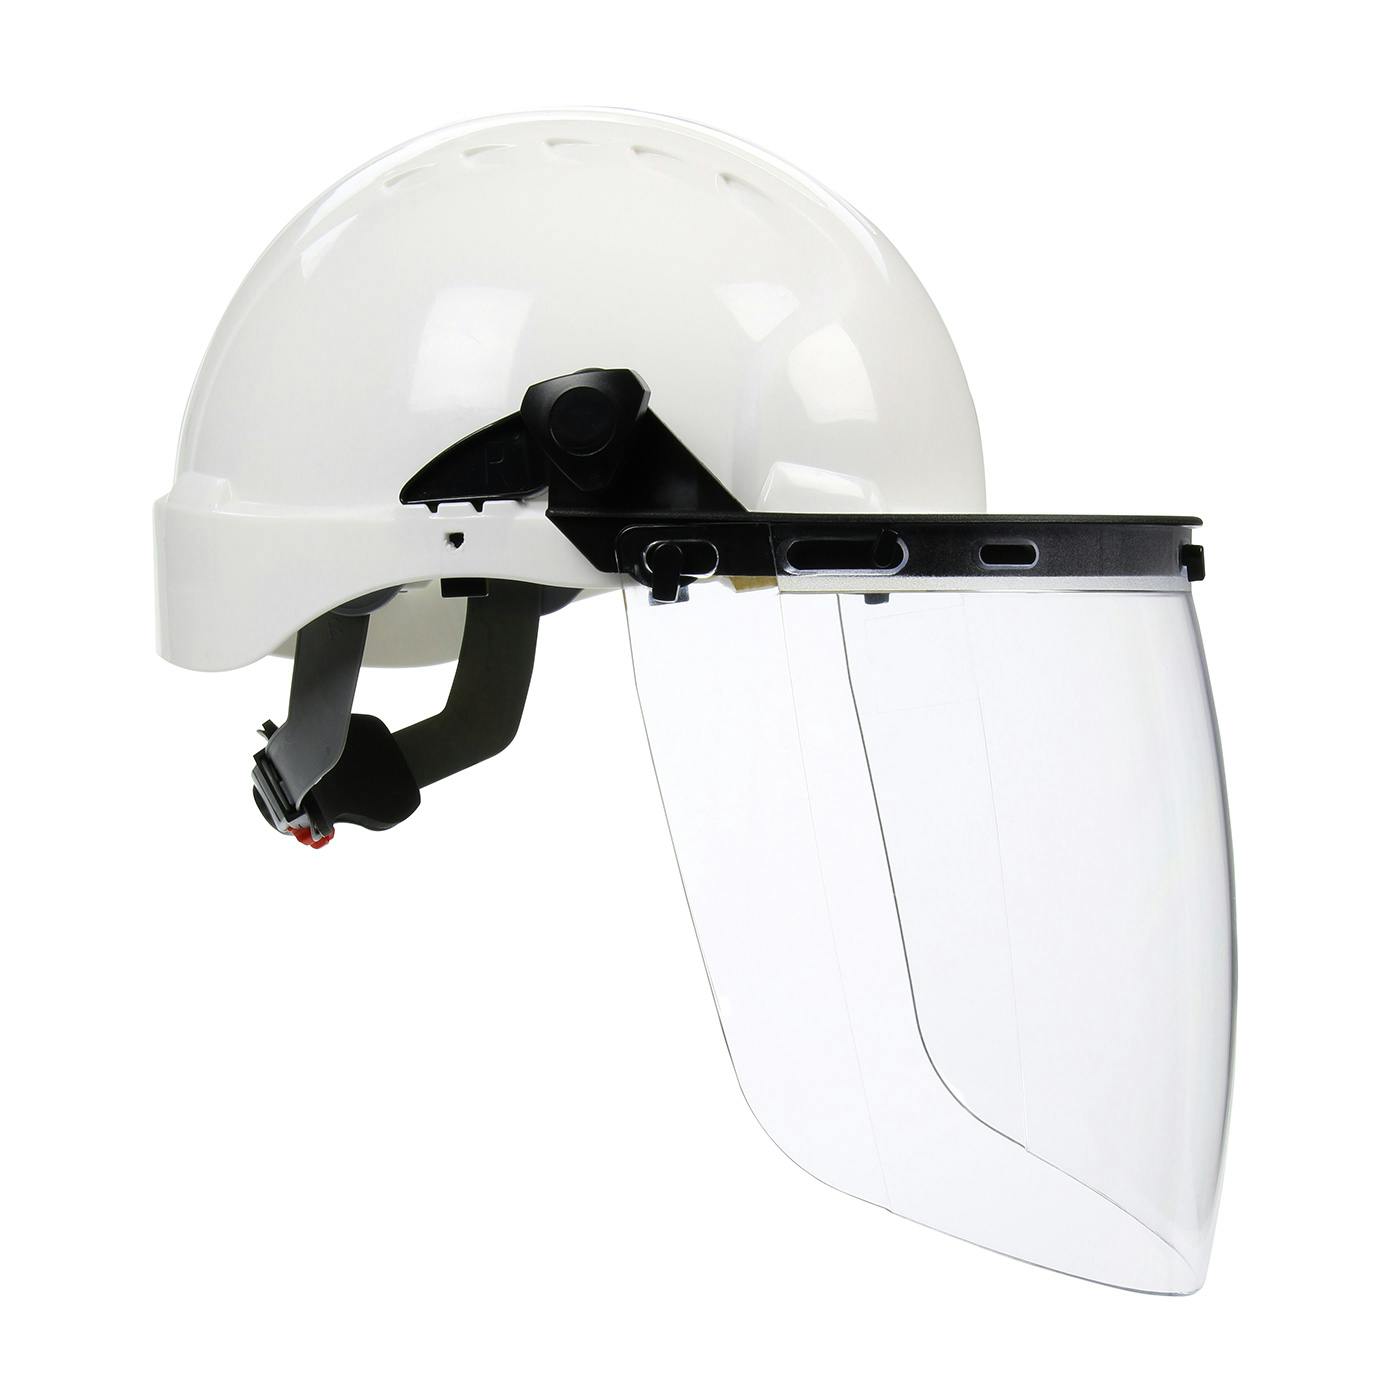 Plastic Face Shield Bracket for Cap Style Hard Hats with Universal Slots, Black (251-01-5225) - OS_0